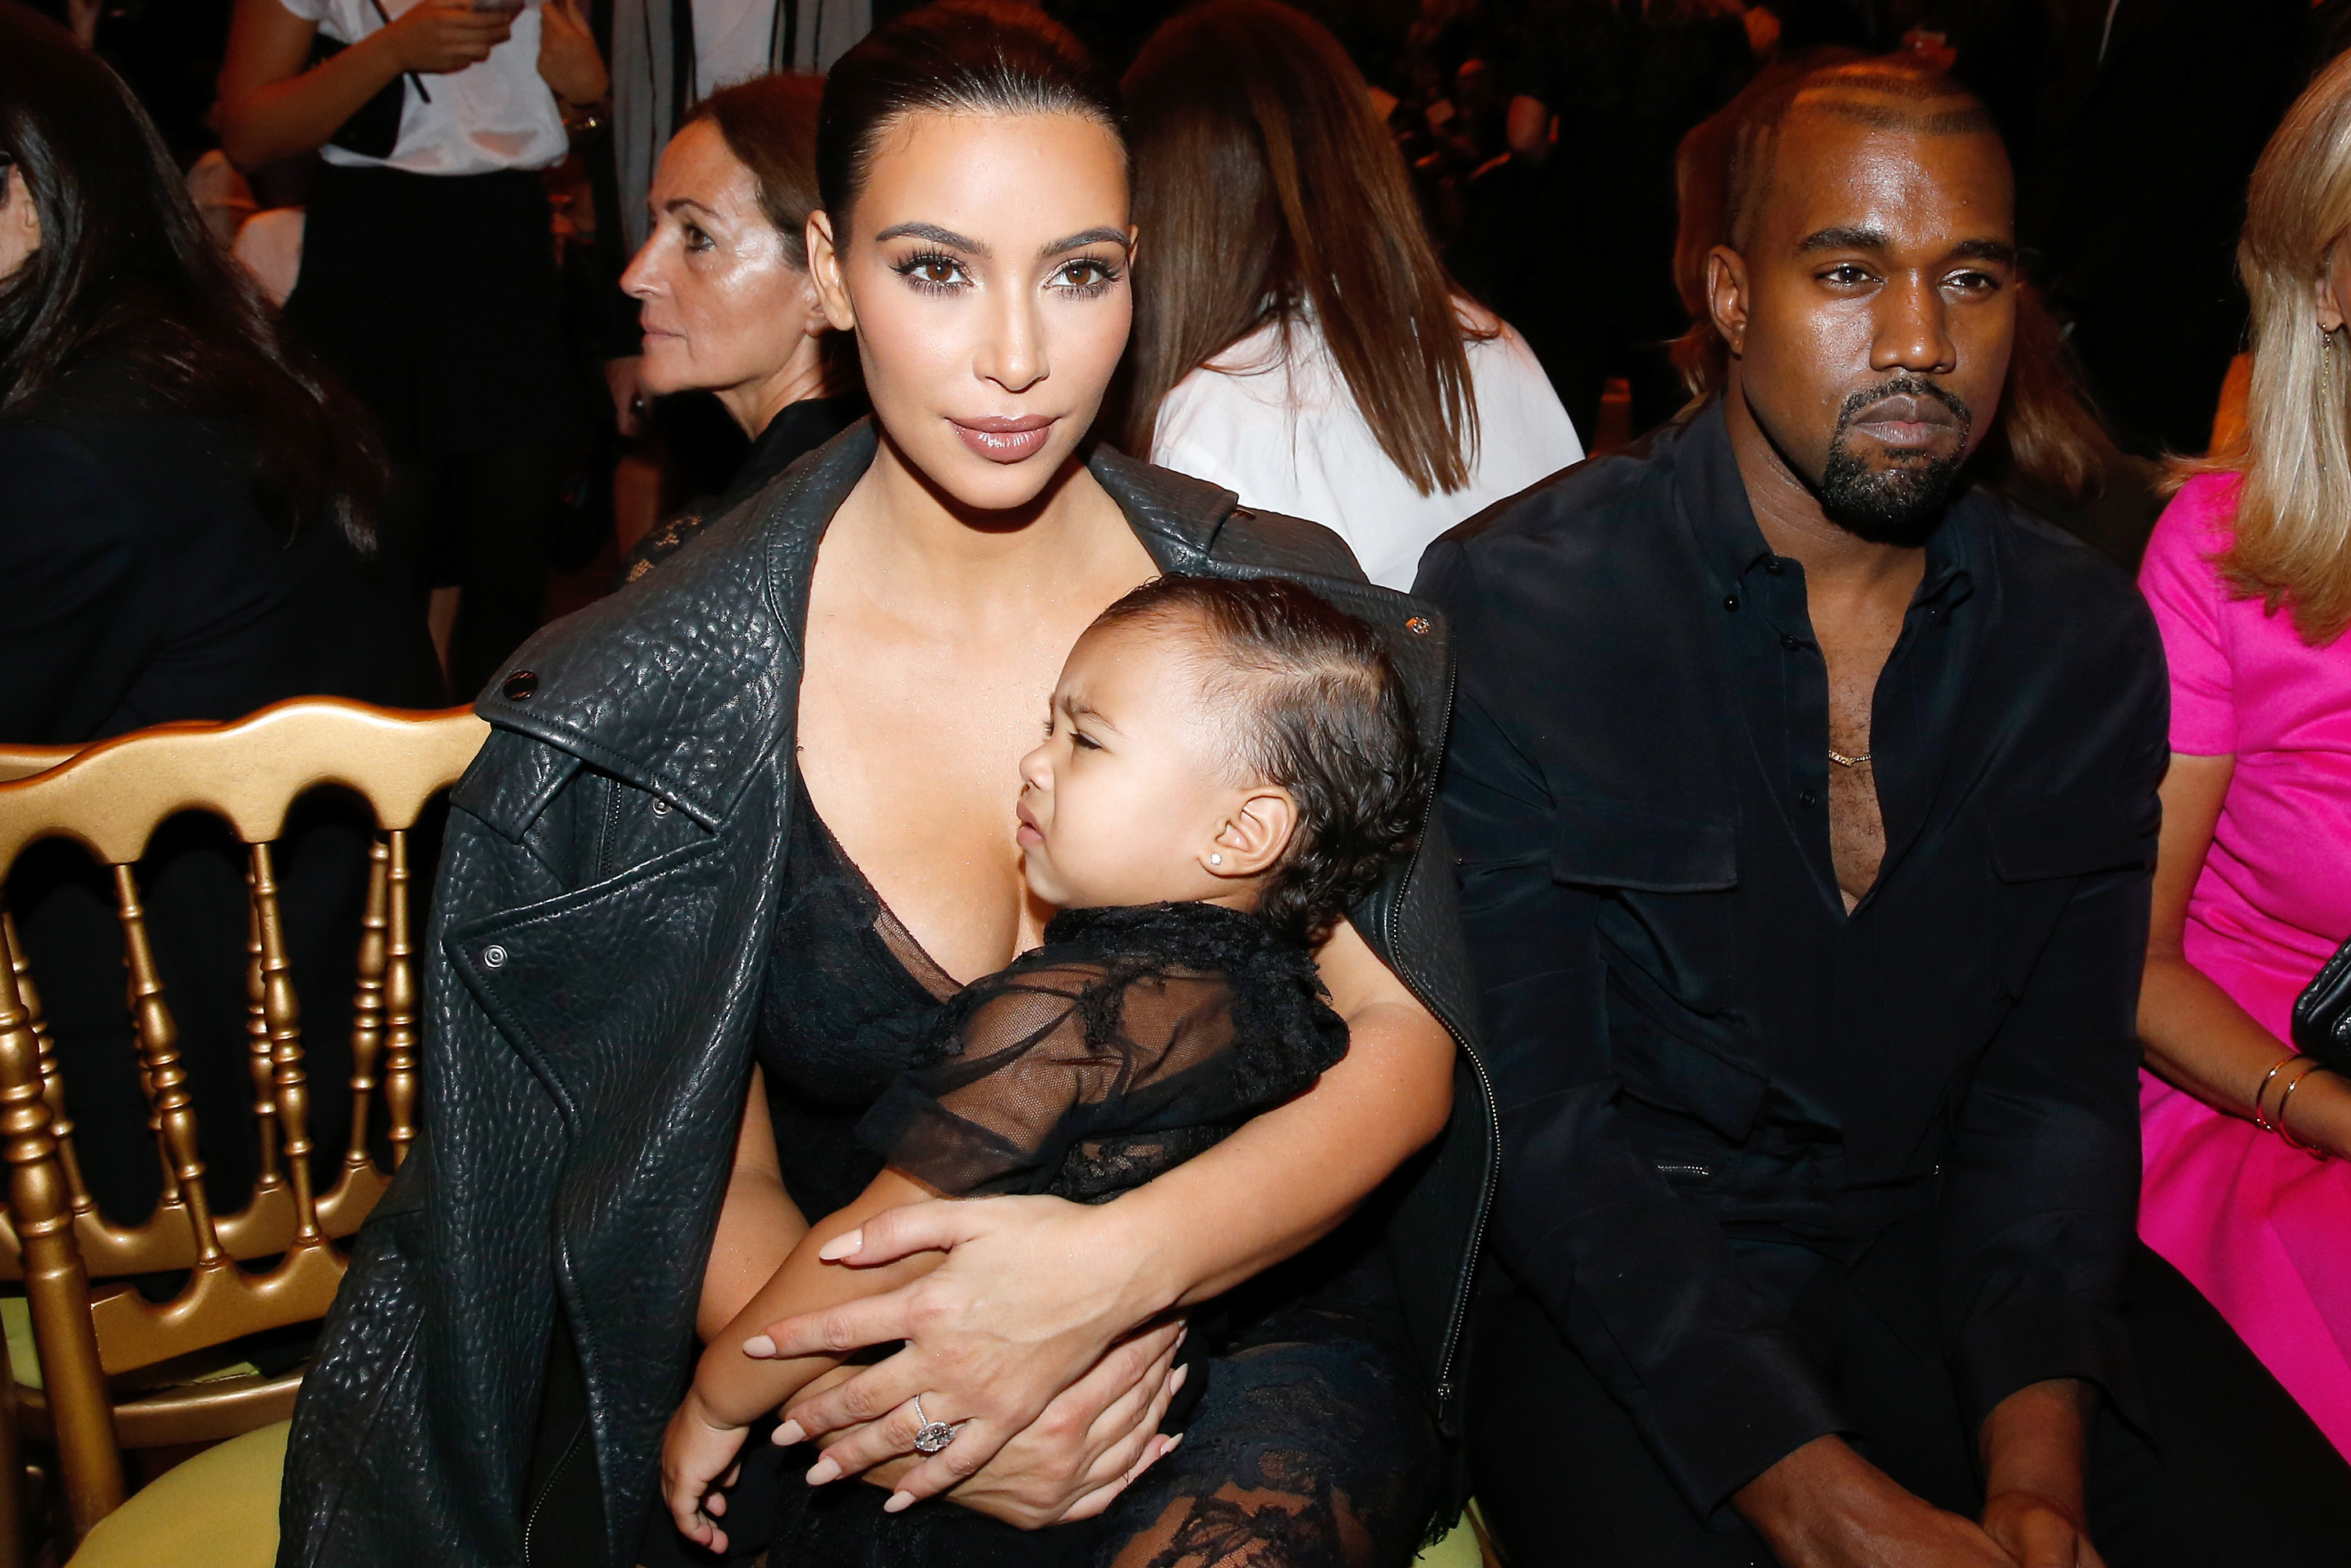 Kim Kardashian, Kanye West and their daughter North West at the Givenchy Spring/Summer 2015 fashion show.